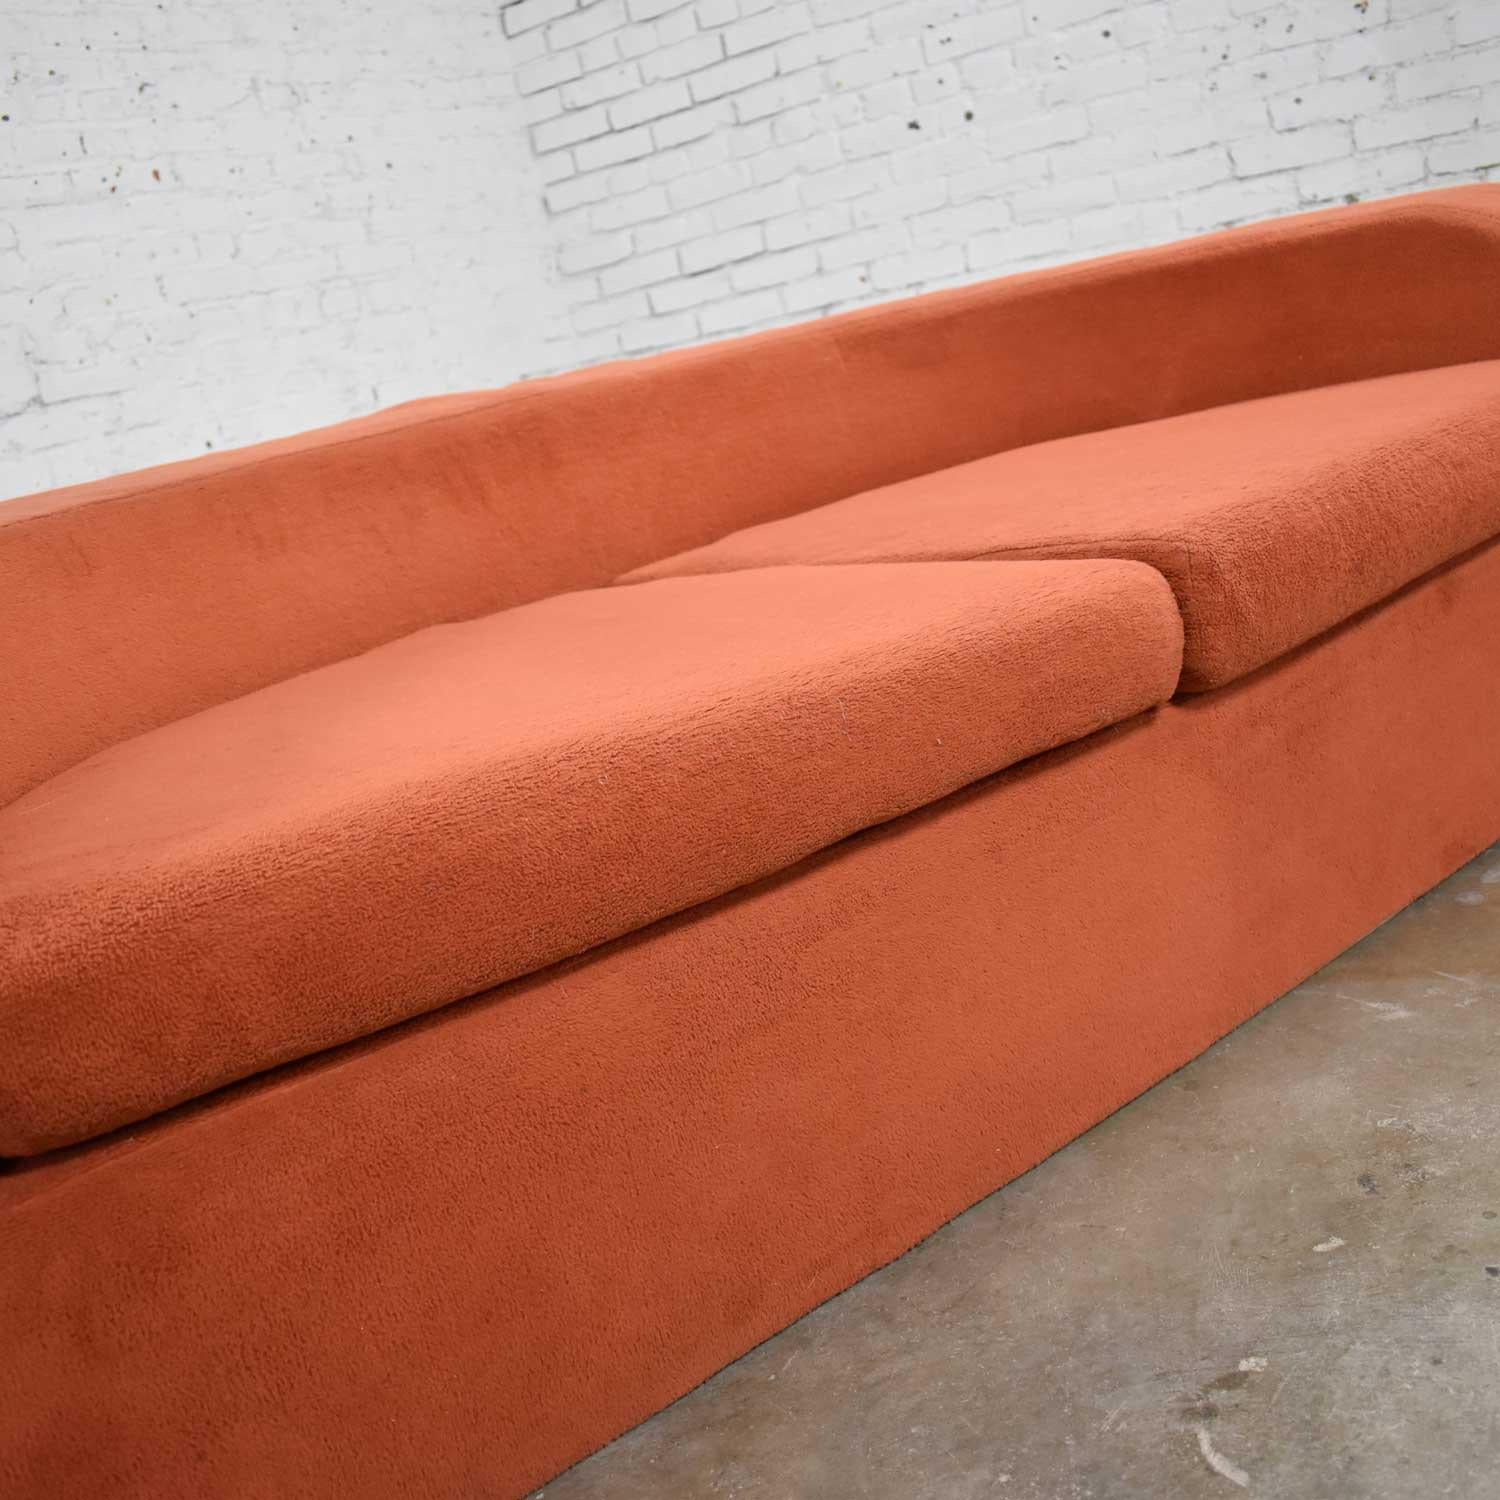 American Mod Round Sleeper Sofa with Ottomans in Orange Fuzzy Fabric by Spherical Furn